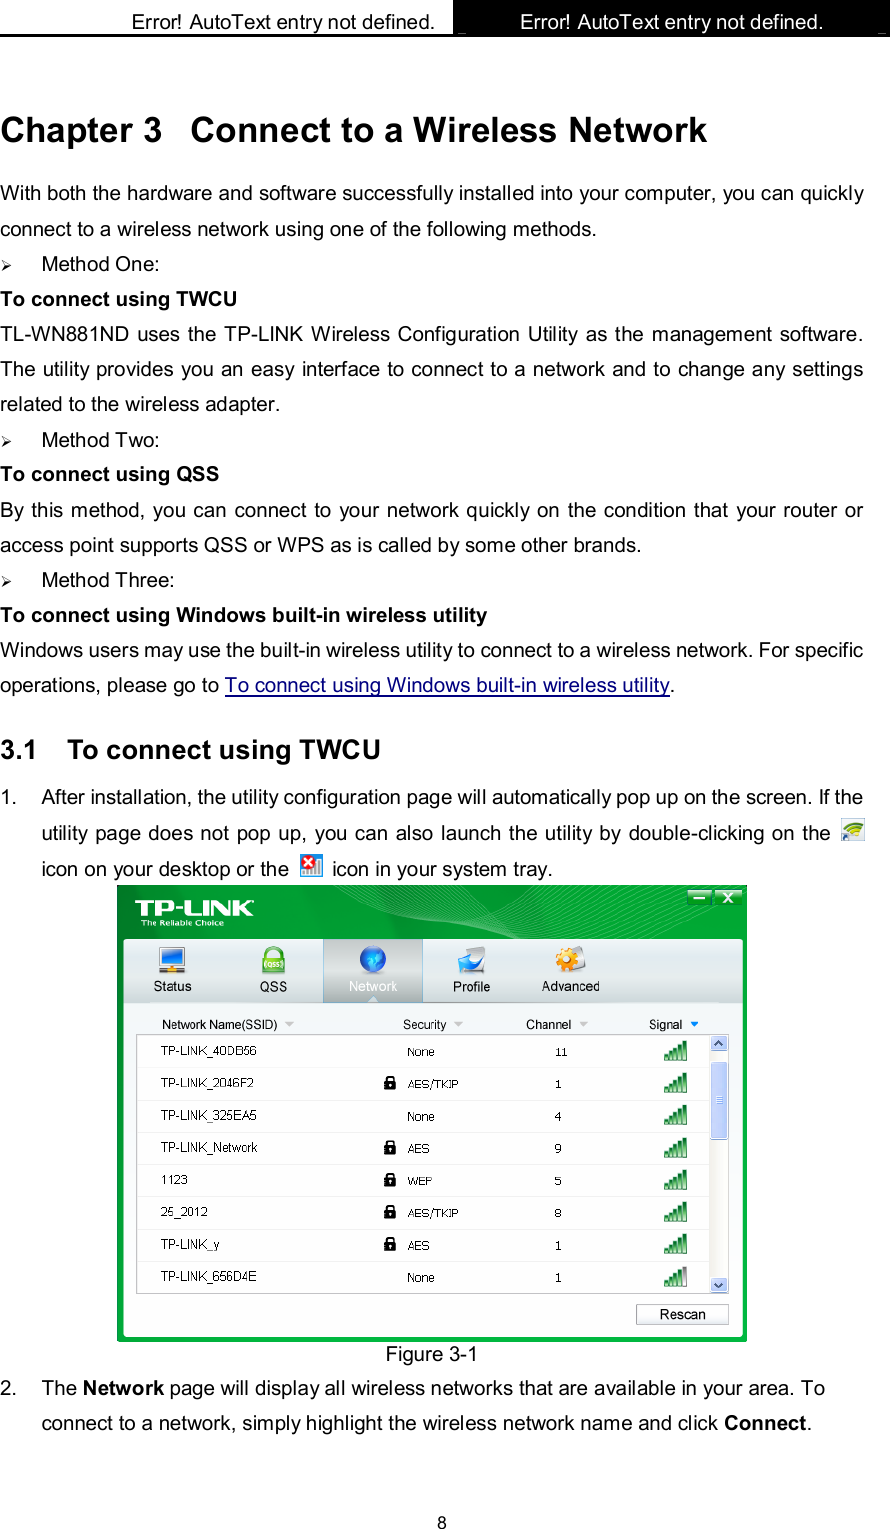    Error! AutoText entry not defined. Error! AutoText entry not defined.    8 Chapter 3  Connect to a Wireless Network With both the hardware and software successfully installed into your computer, you can quickly connect to a wireless network using one of the following methods.  Method One: To connect using TWCU TL-WN881ND uses the TP-LINK Wireless Configuration Utility as the management software. The utility provides you an easy interface to connect to a network and to change any settings related to the wireless adapter.    Method Two: To connect using QSS By this method, you can connect to your network quickly on the condition that your router or access point supports QSS or WPS as is called by some other brands.    Method Three: To connect using Windows built-in wireless utility Windows users may use the built-in wireless utility to connect to a wireless network. For specific operations, please go to To connect using Windows built-in wireless utility. 3.1  To connect using TWCU 1.  After installation, the utility configuration page will automatically pop up on the screen. If the utility page does not pop up, you can also launch the utility by double-clicking on the   icon on your desktop or the    icon in your system tray.    Figure 3-1 2.  The Network page will display all wireless networks that are available in your area. To connect to a network, simply highlight the wireless network name and click Connect. 